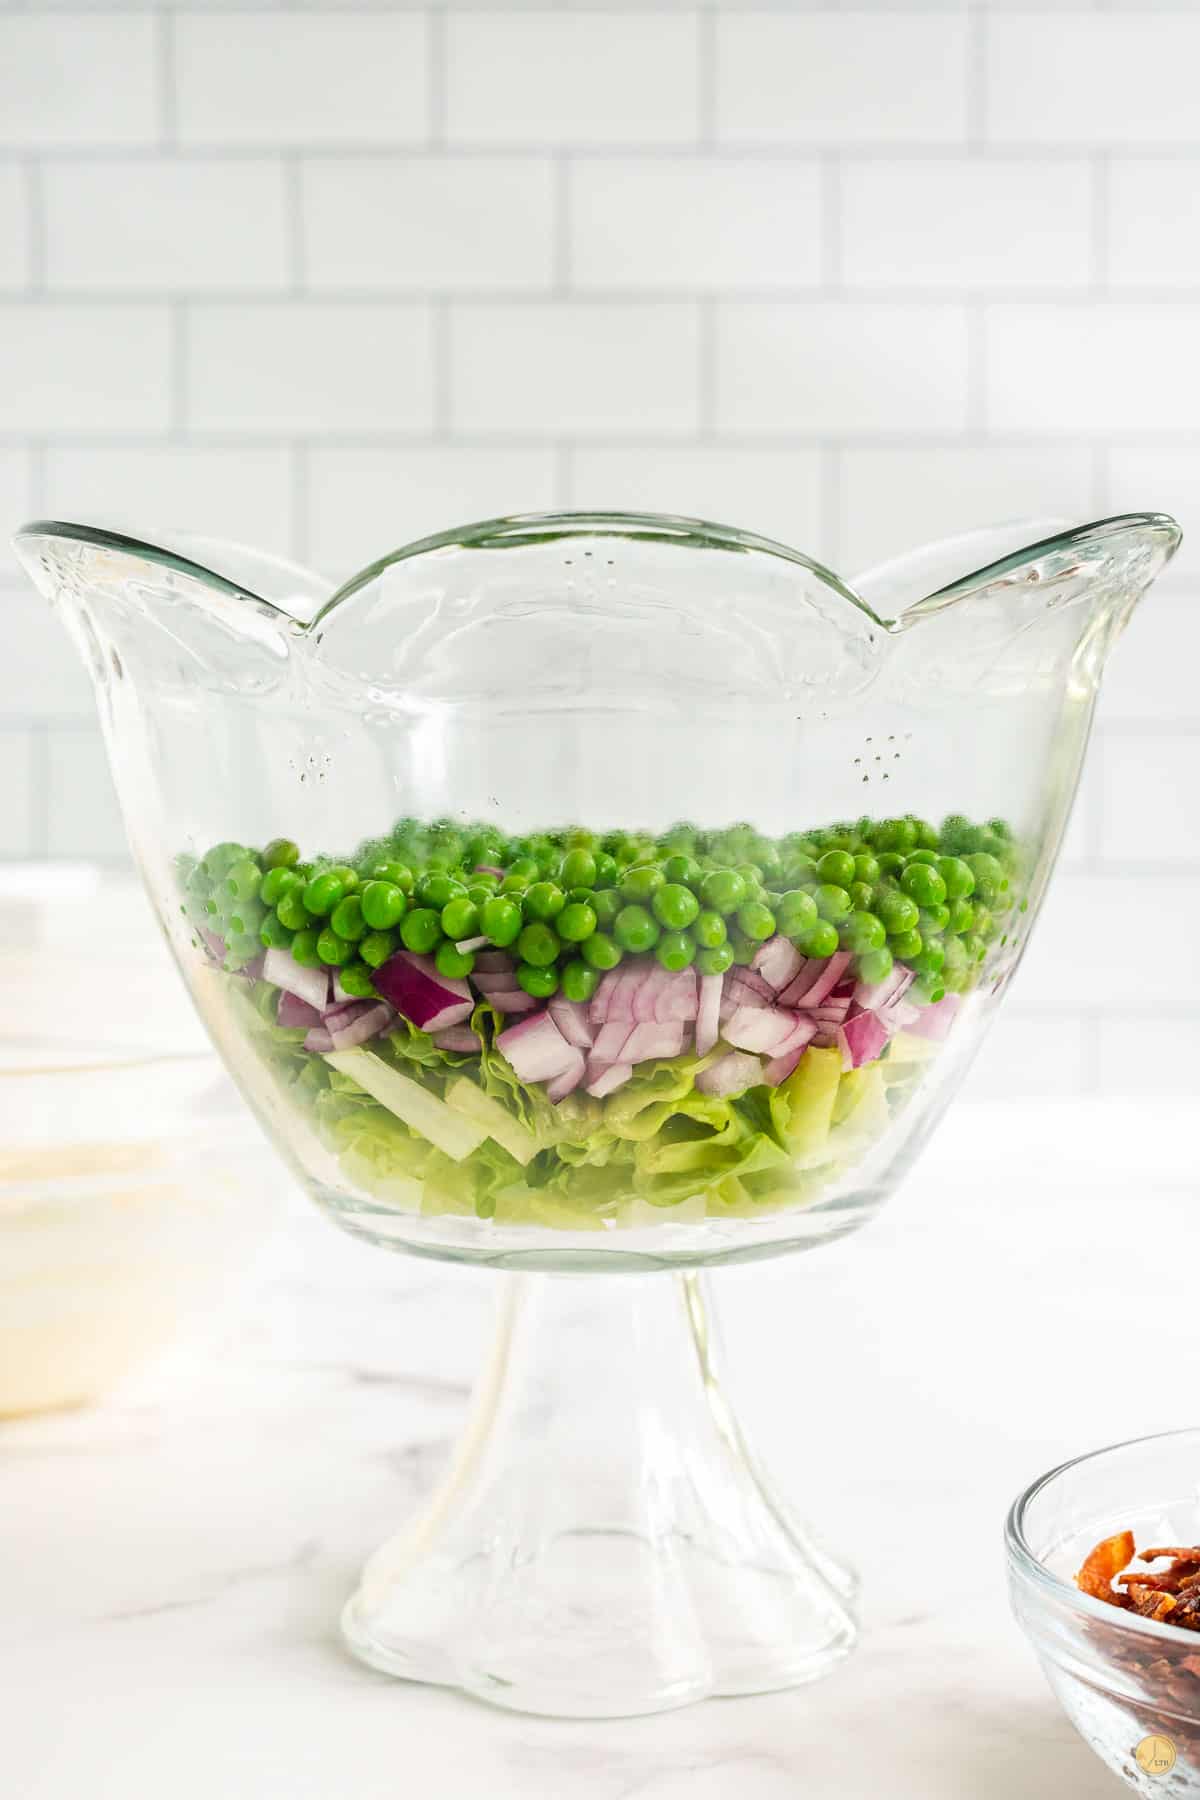 lettuce, peas, and onion in a bowl